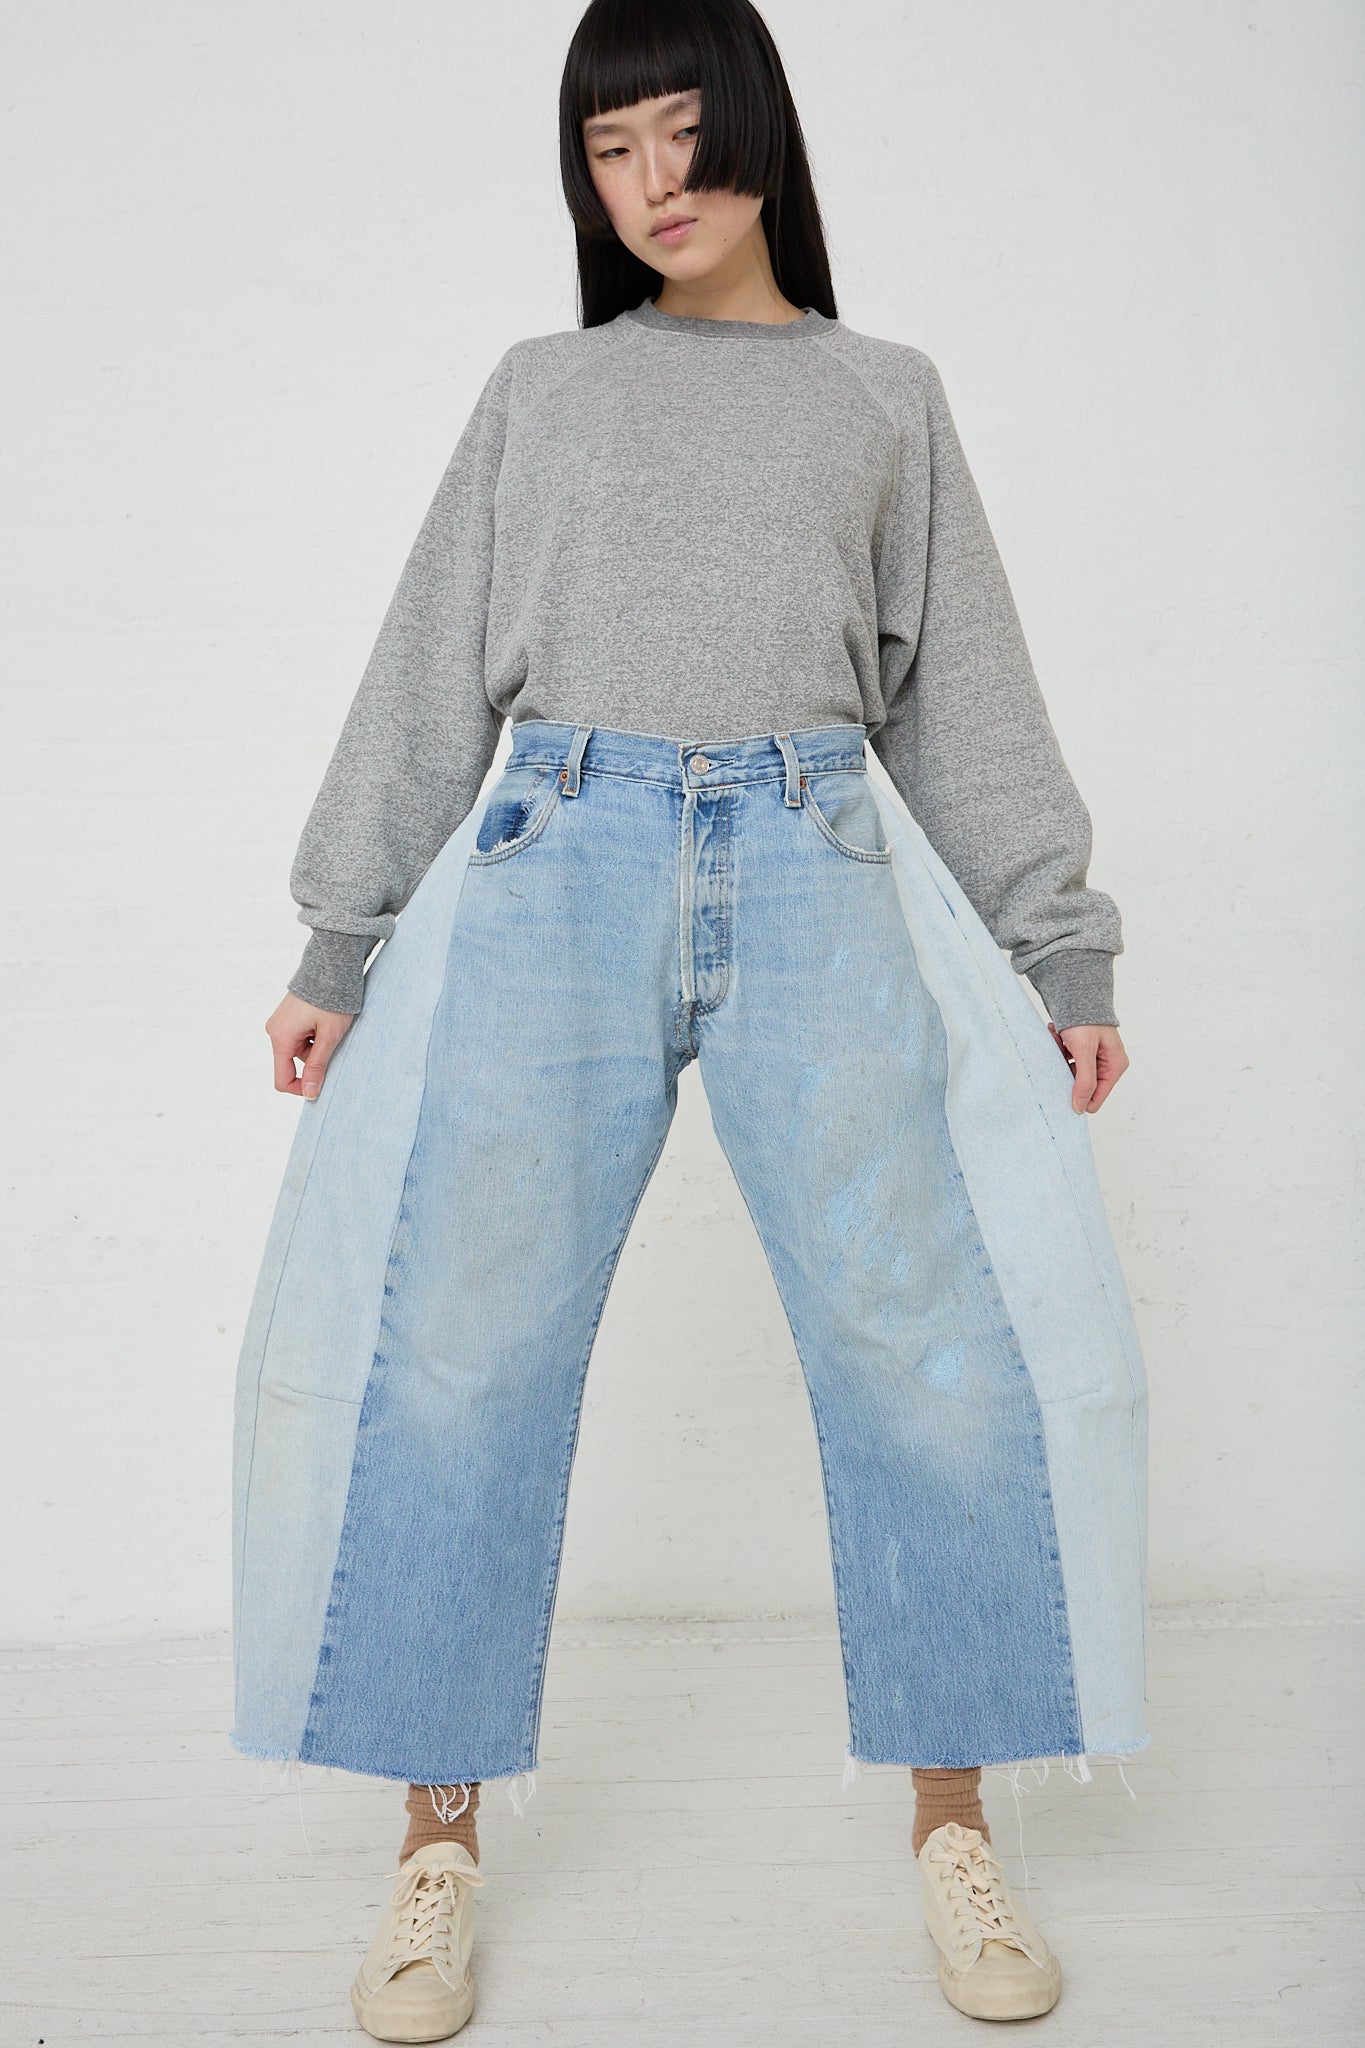 A woman wearing a B Sides Lasso Jean in Vintage Indigo denim jeans and a sweater.